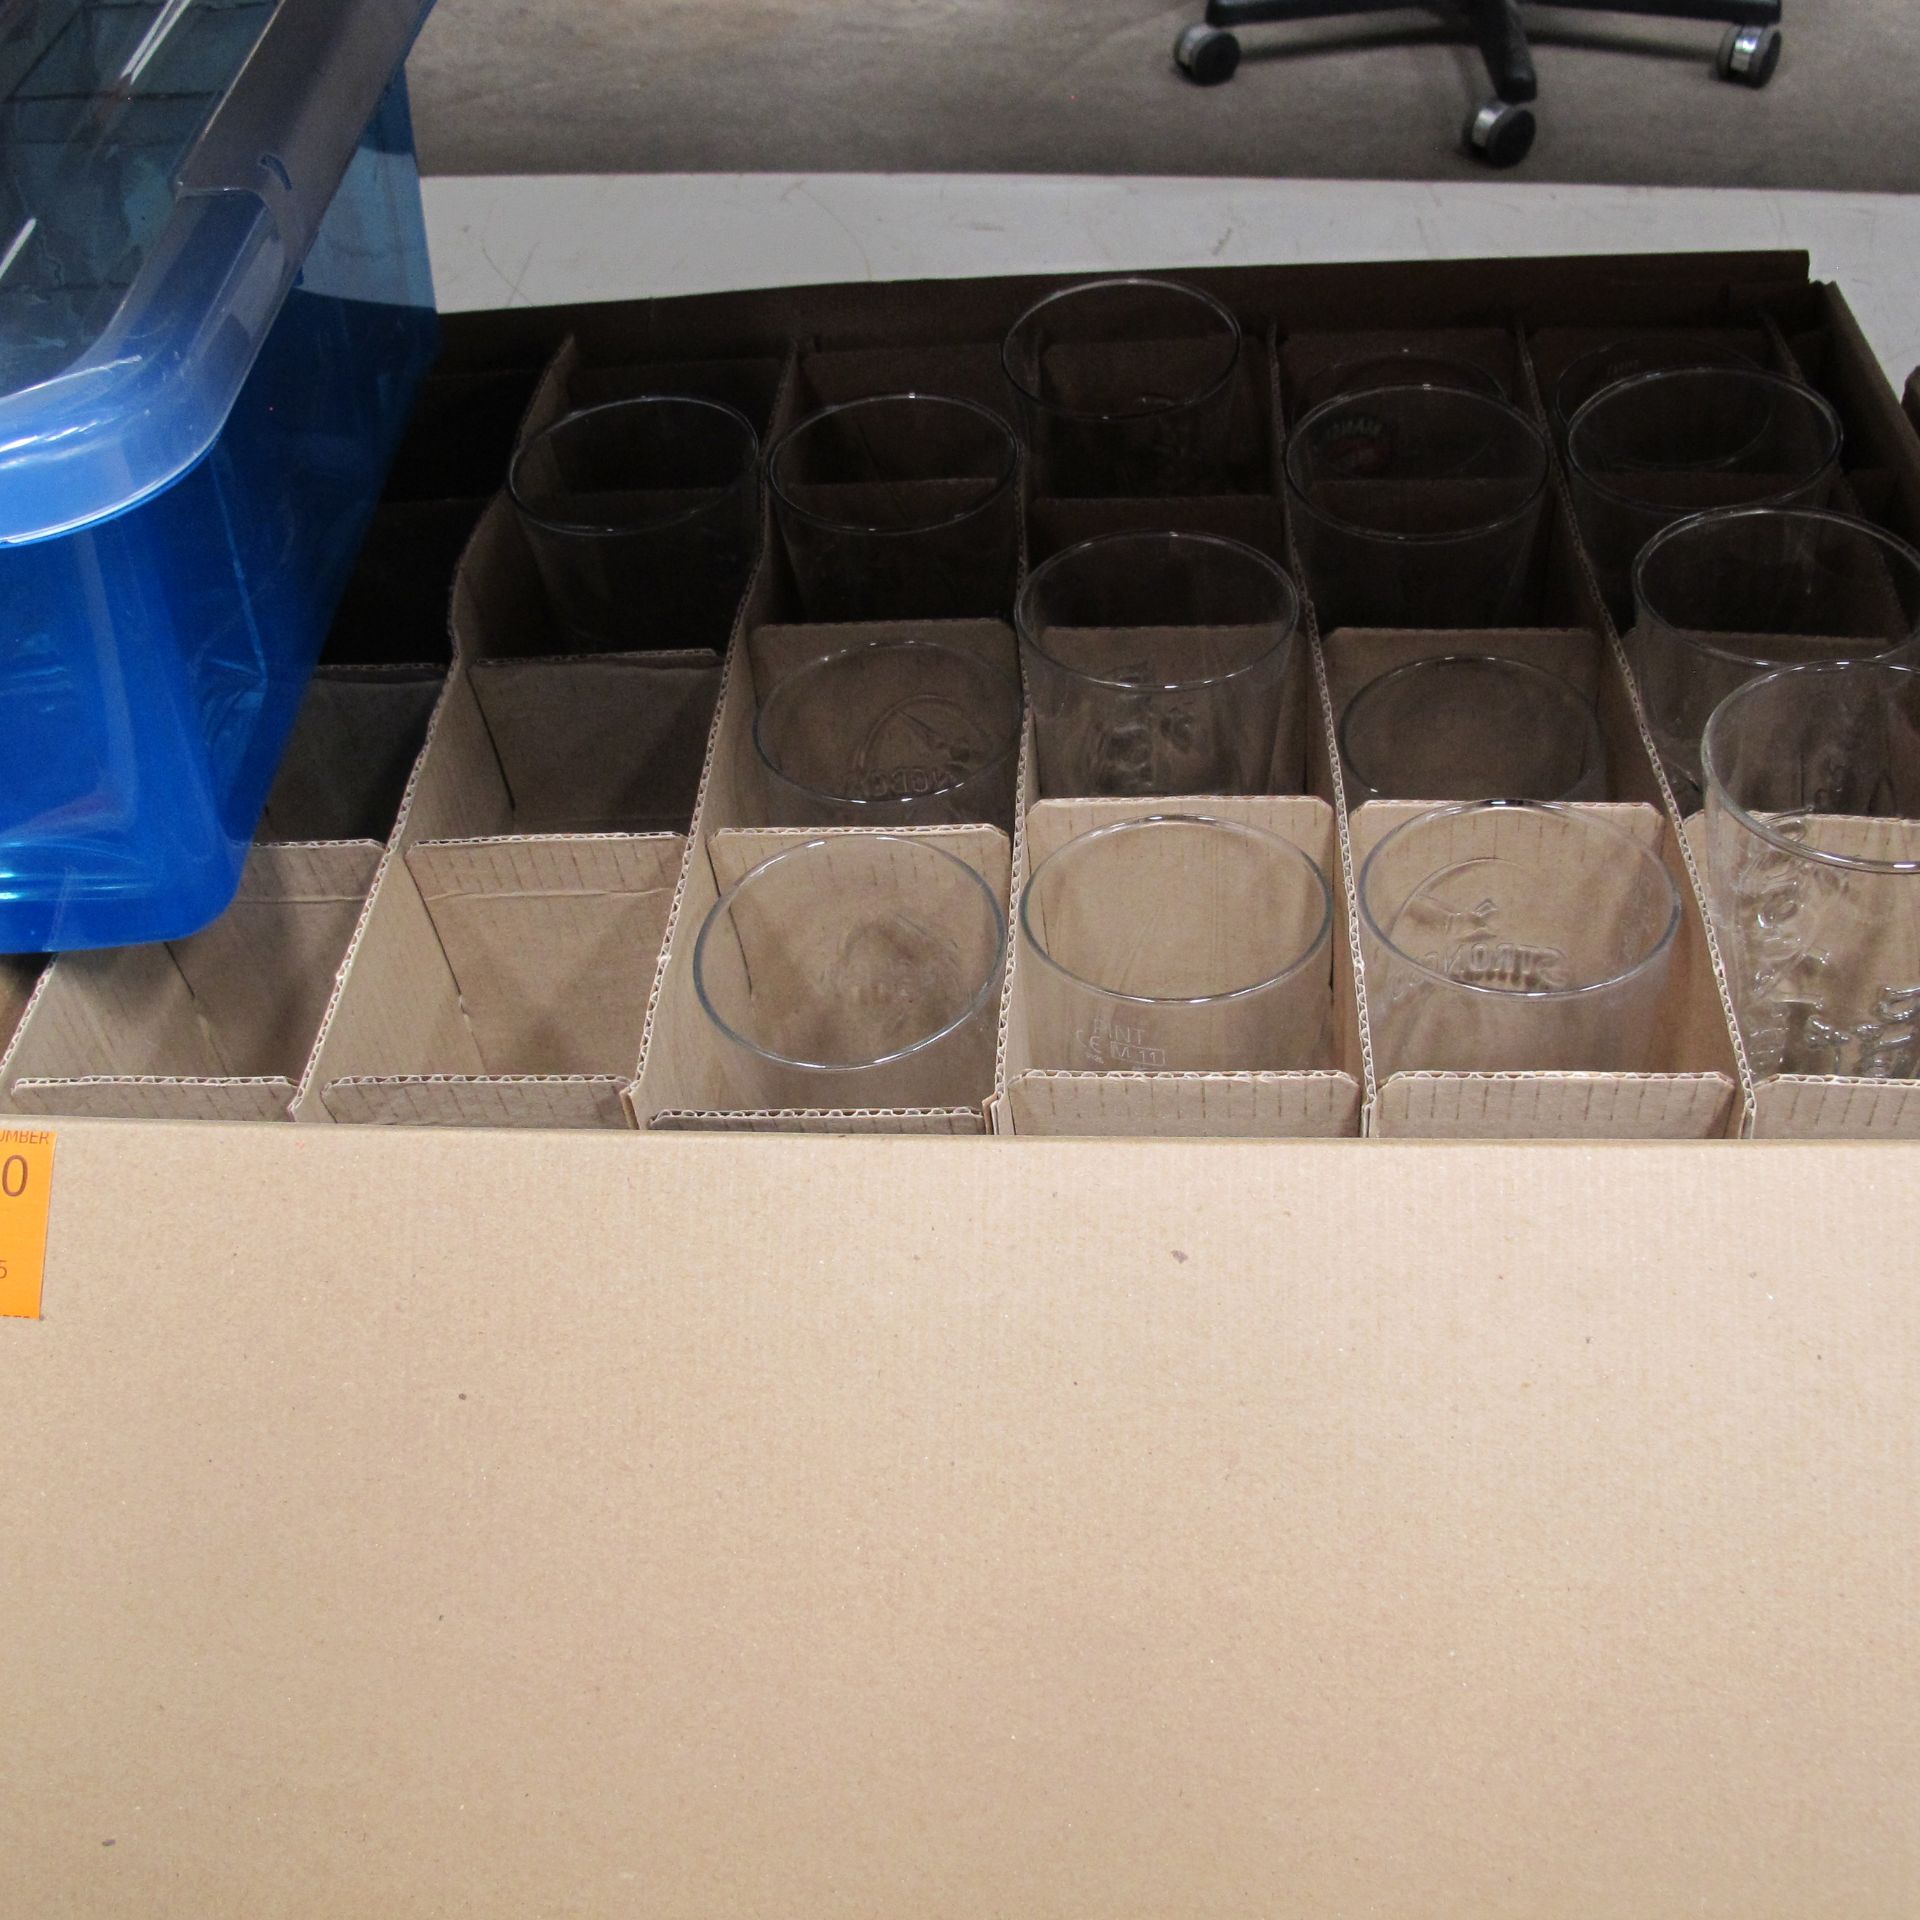 6 x Boxes of Pint and ½ pint glasses c/w folding metal patio umbrella stand - Image 3 of 6